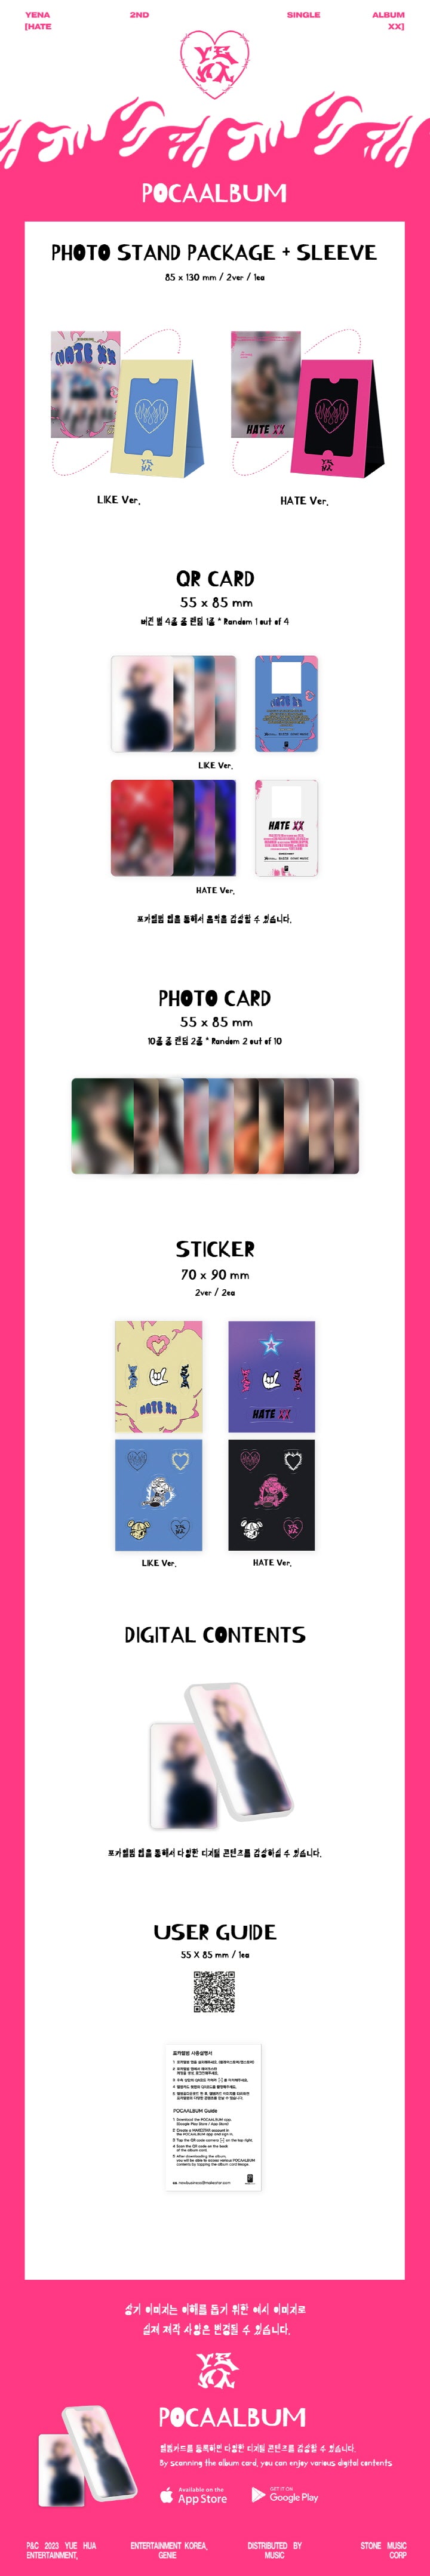 1 QR Card (random out of 4 types)
2 Photo Cards (random out of 10 types)
2 Stickers